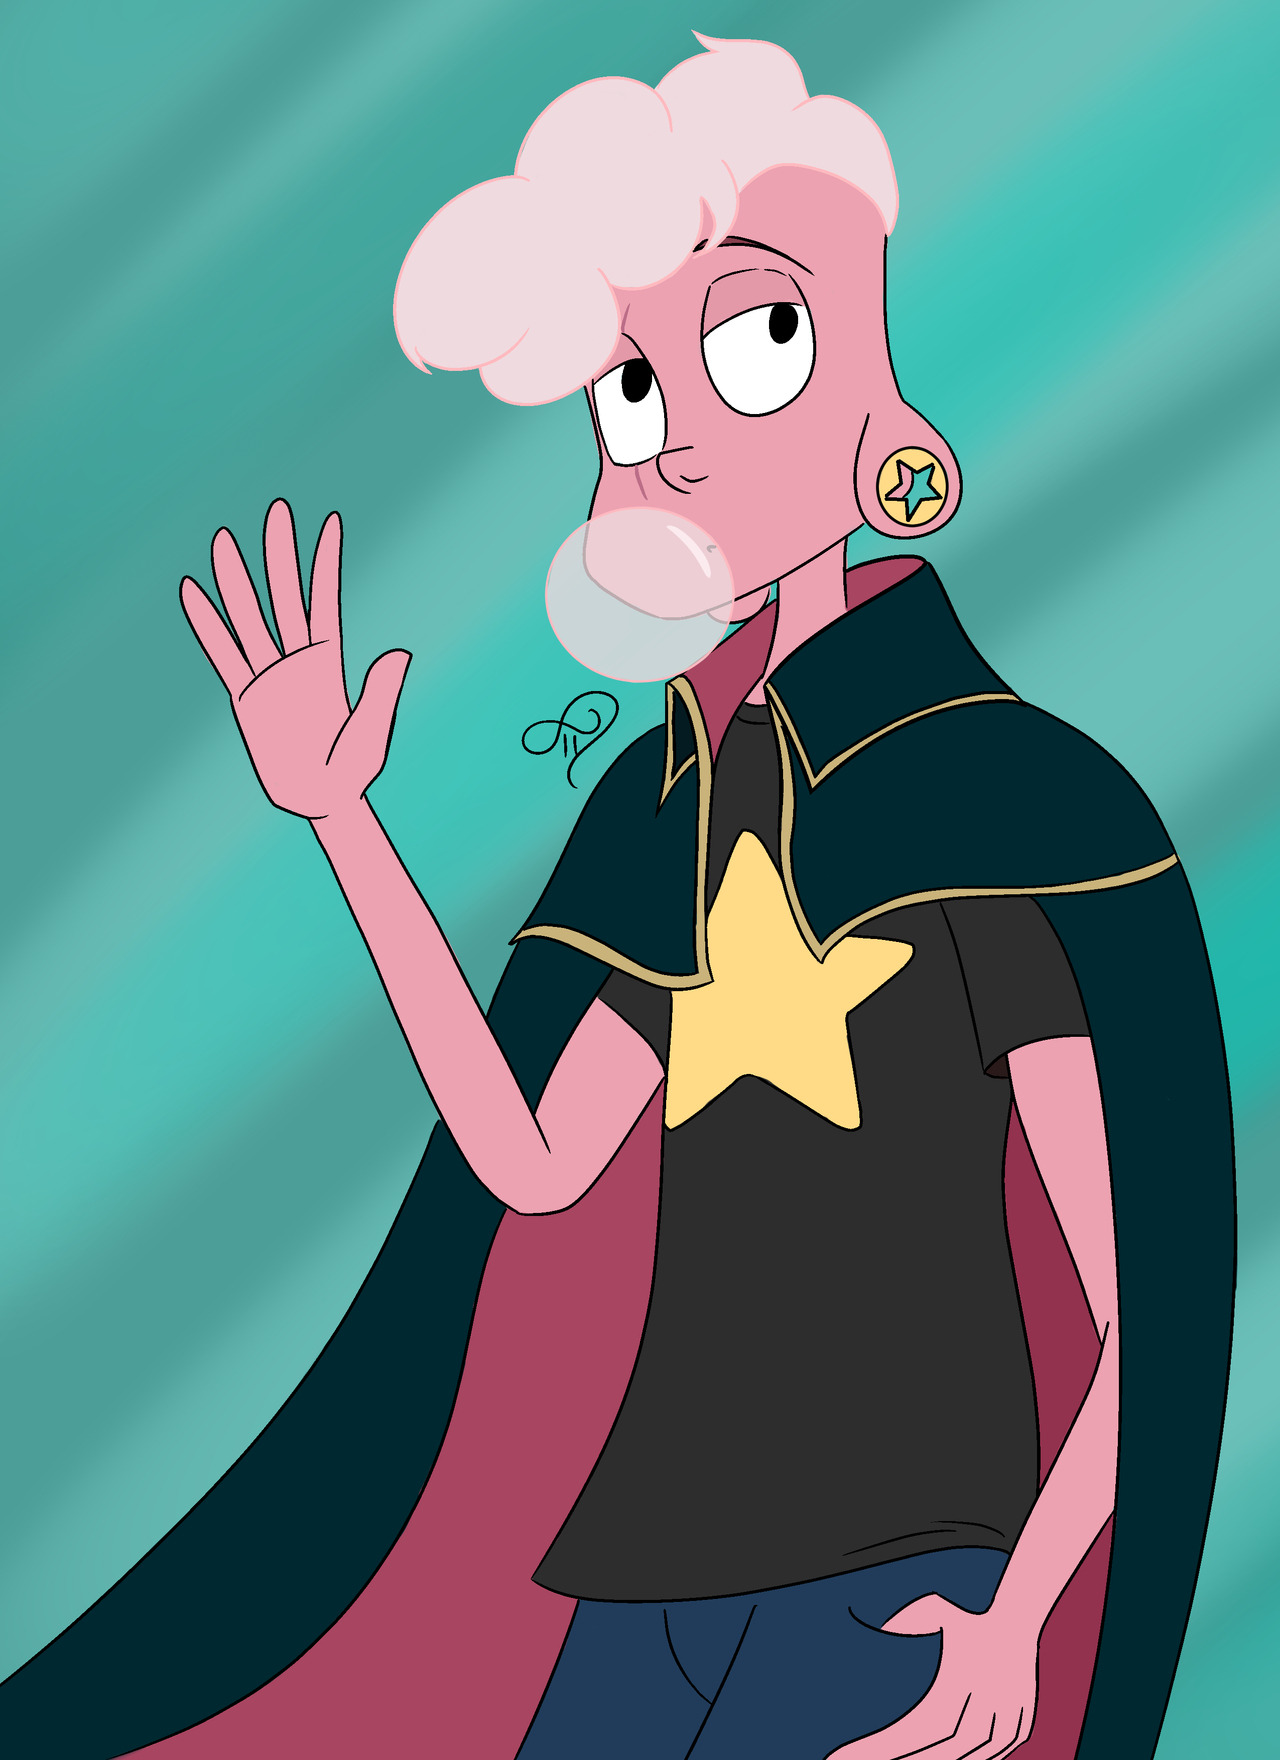 Easing myself back into drawing. Wildly out of practice. The goal is to work up to drawing something every day. So here’s a bubblegum Lars from Steven Universe.